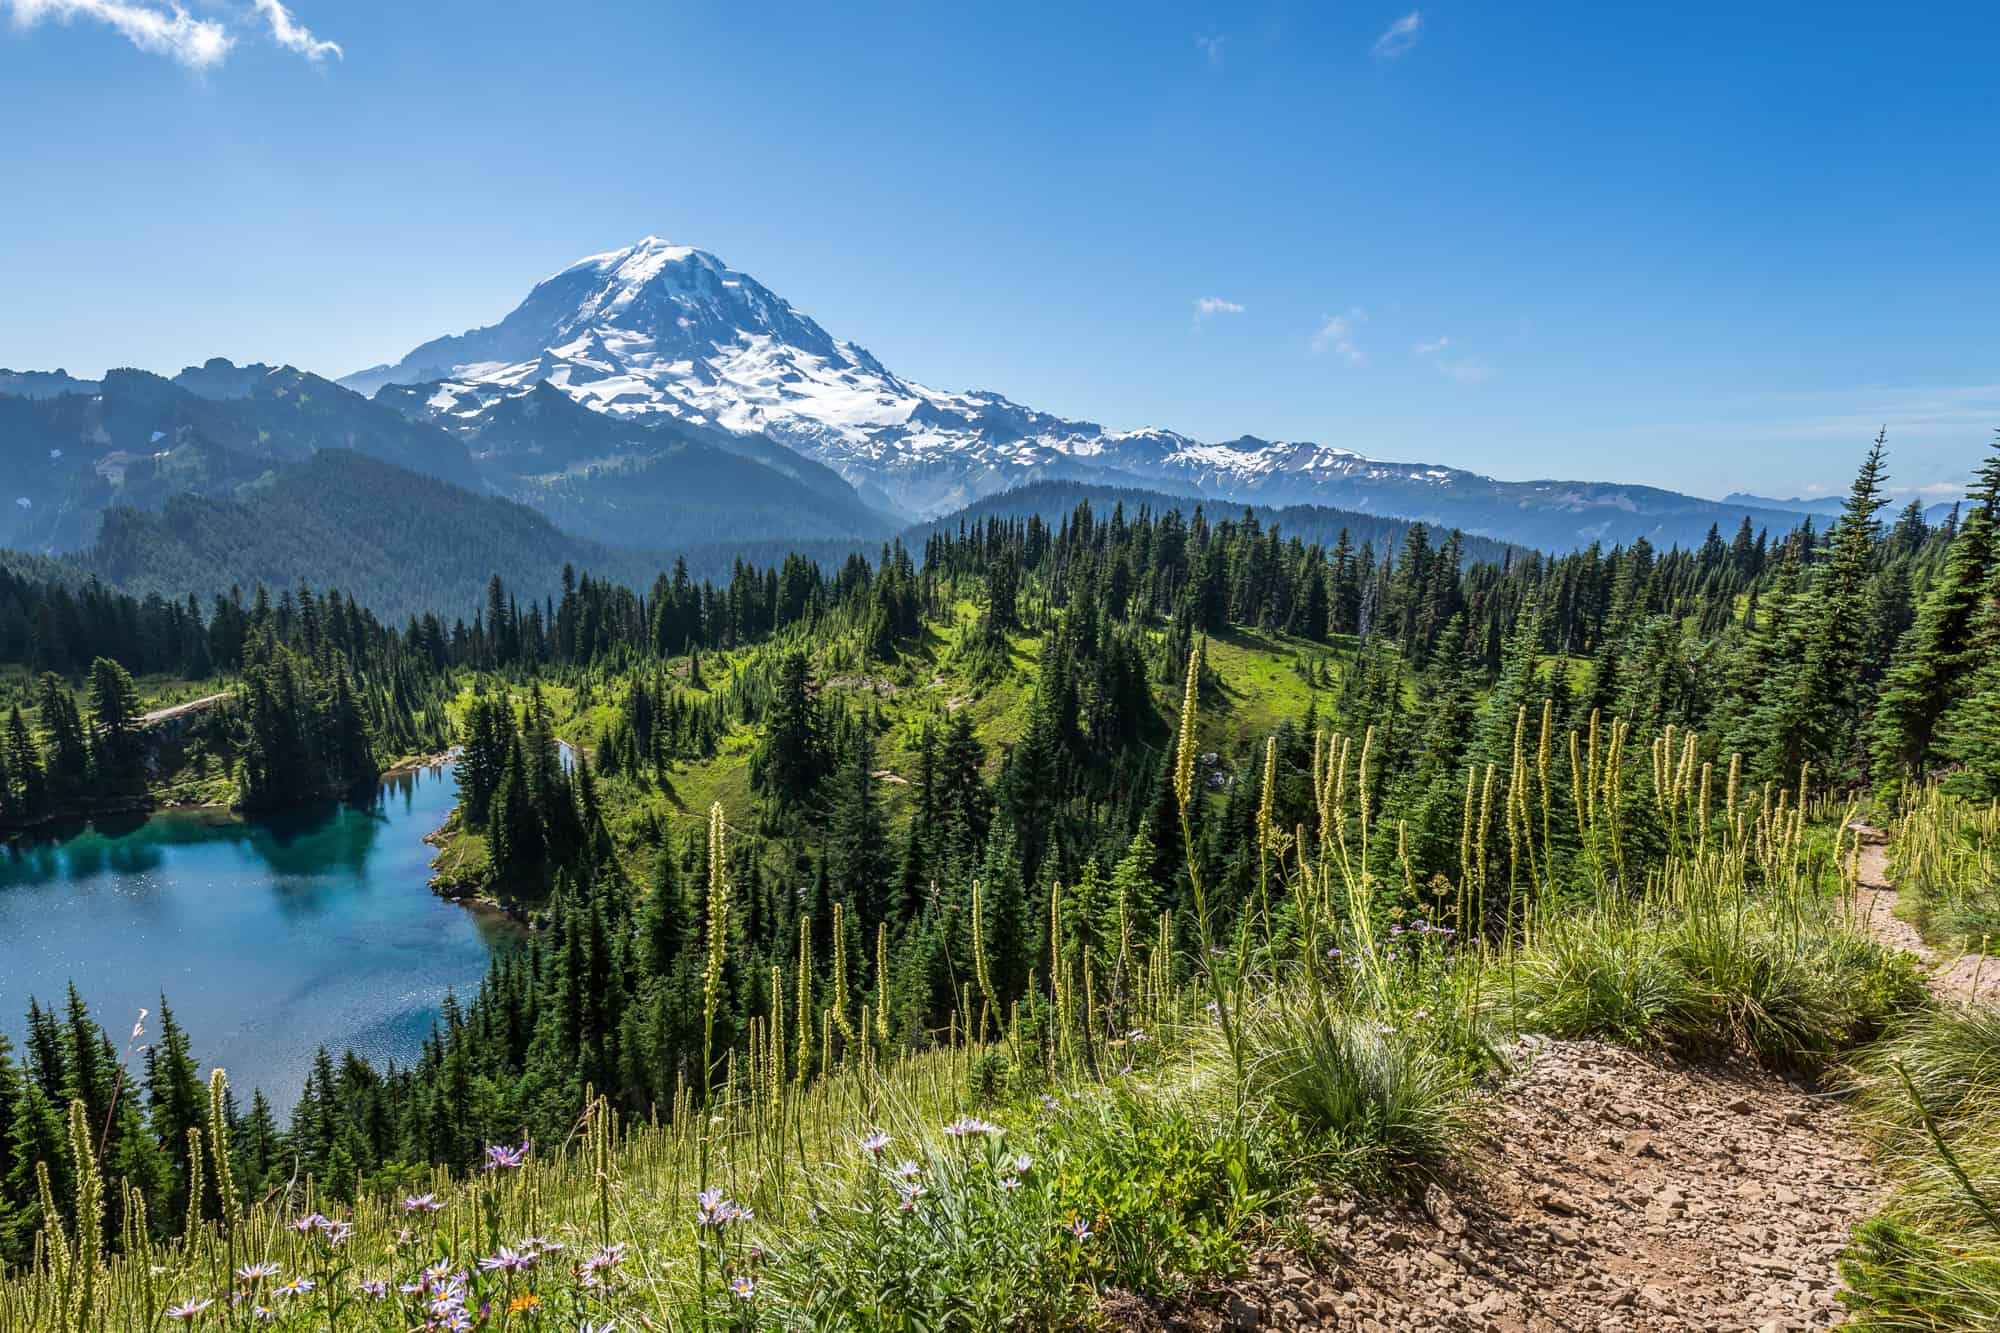 a hiking trail shows a birds eye view above a lake and green trees with mount rainier seen in the background under a blue sky